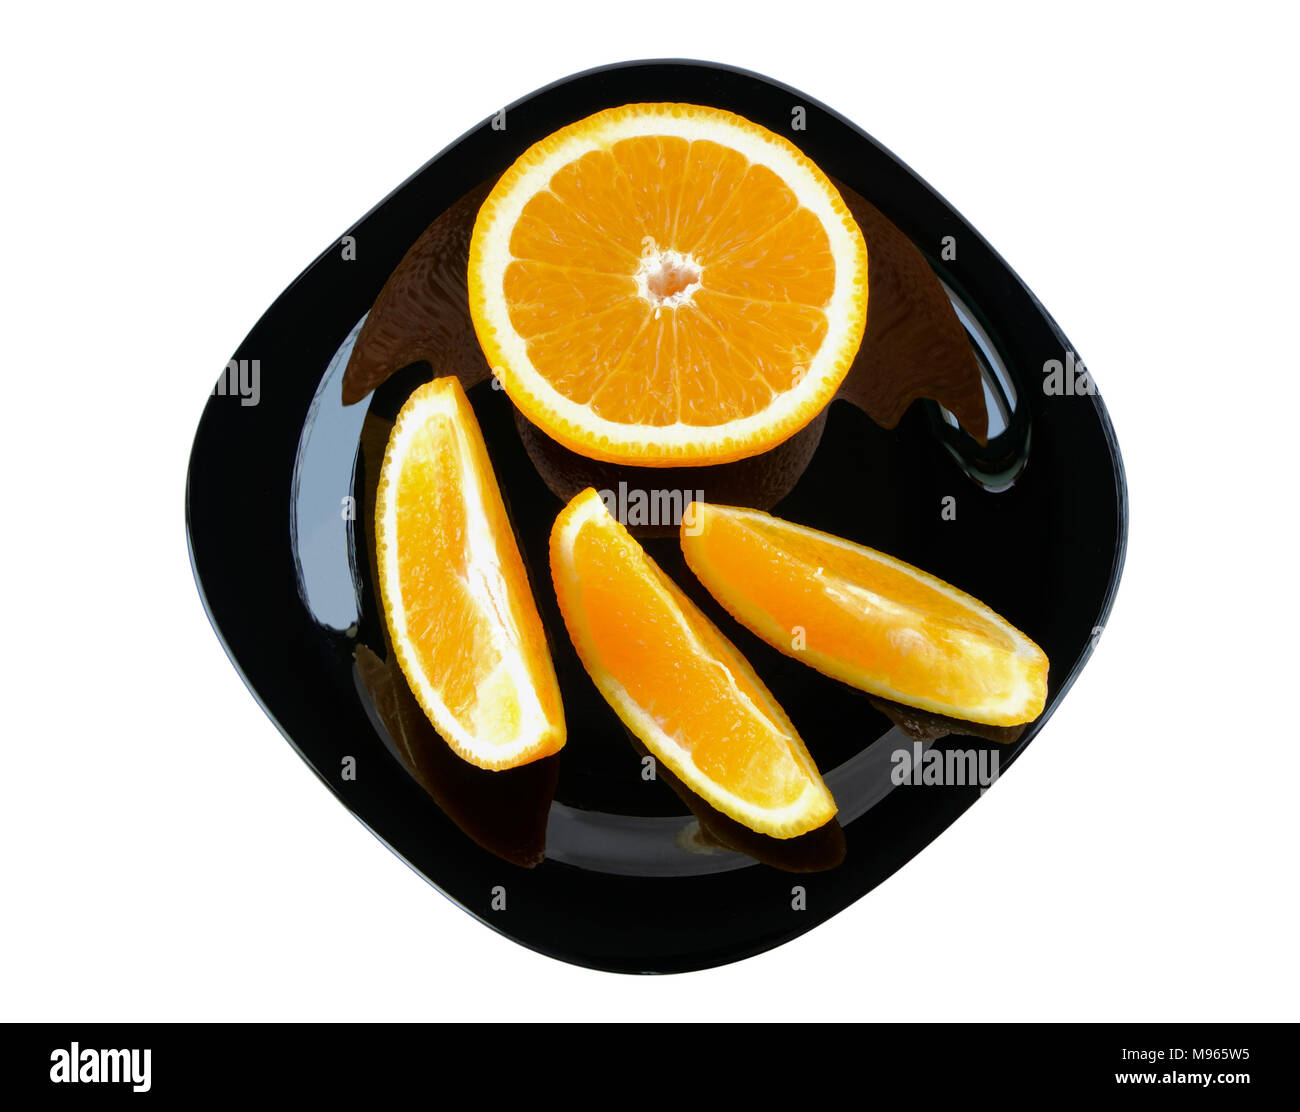 Slices of orange on a plate on white background Stock Photo